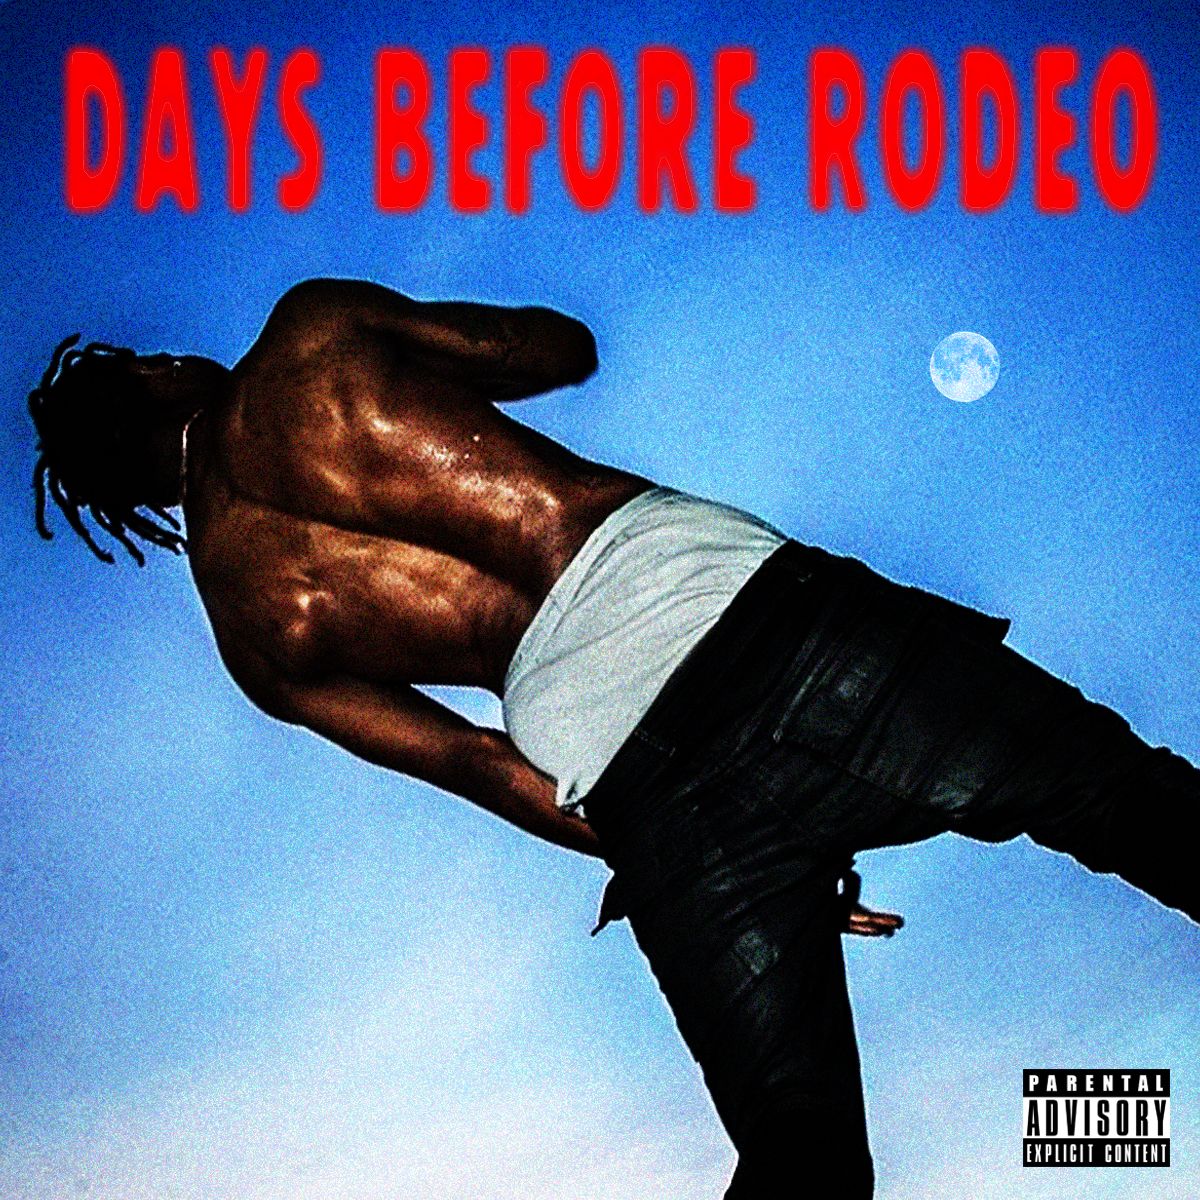 Days Before Rodeo album cover by Travis Scott